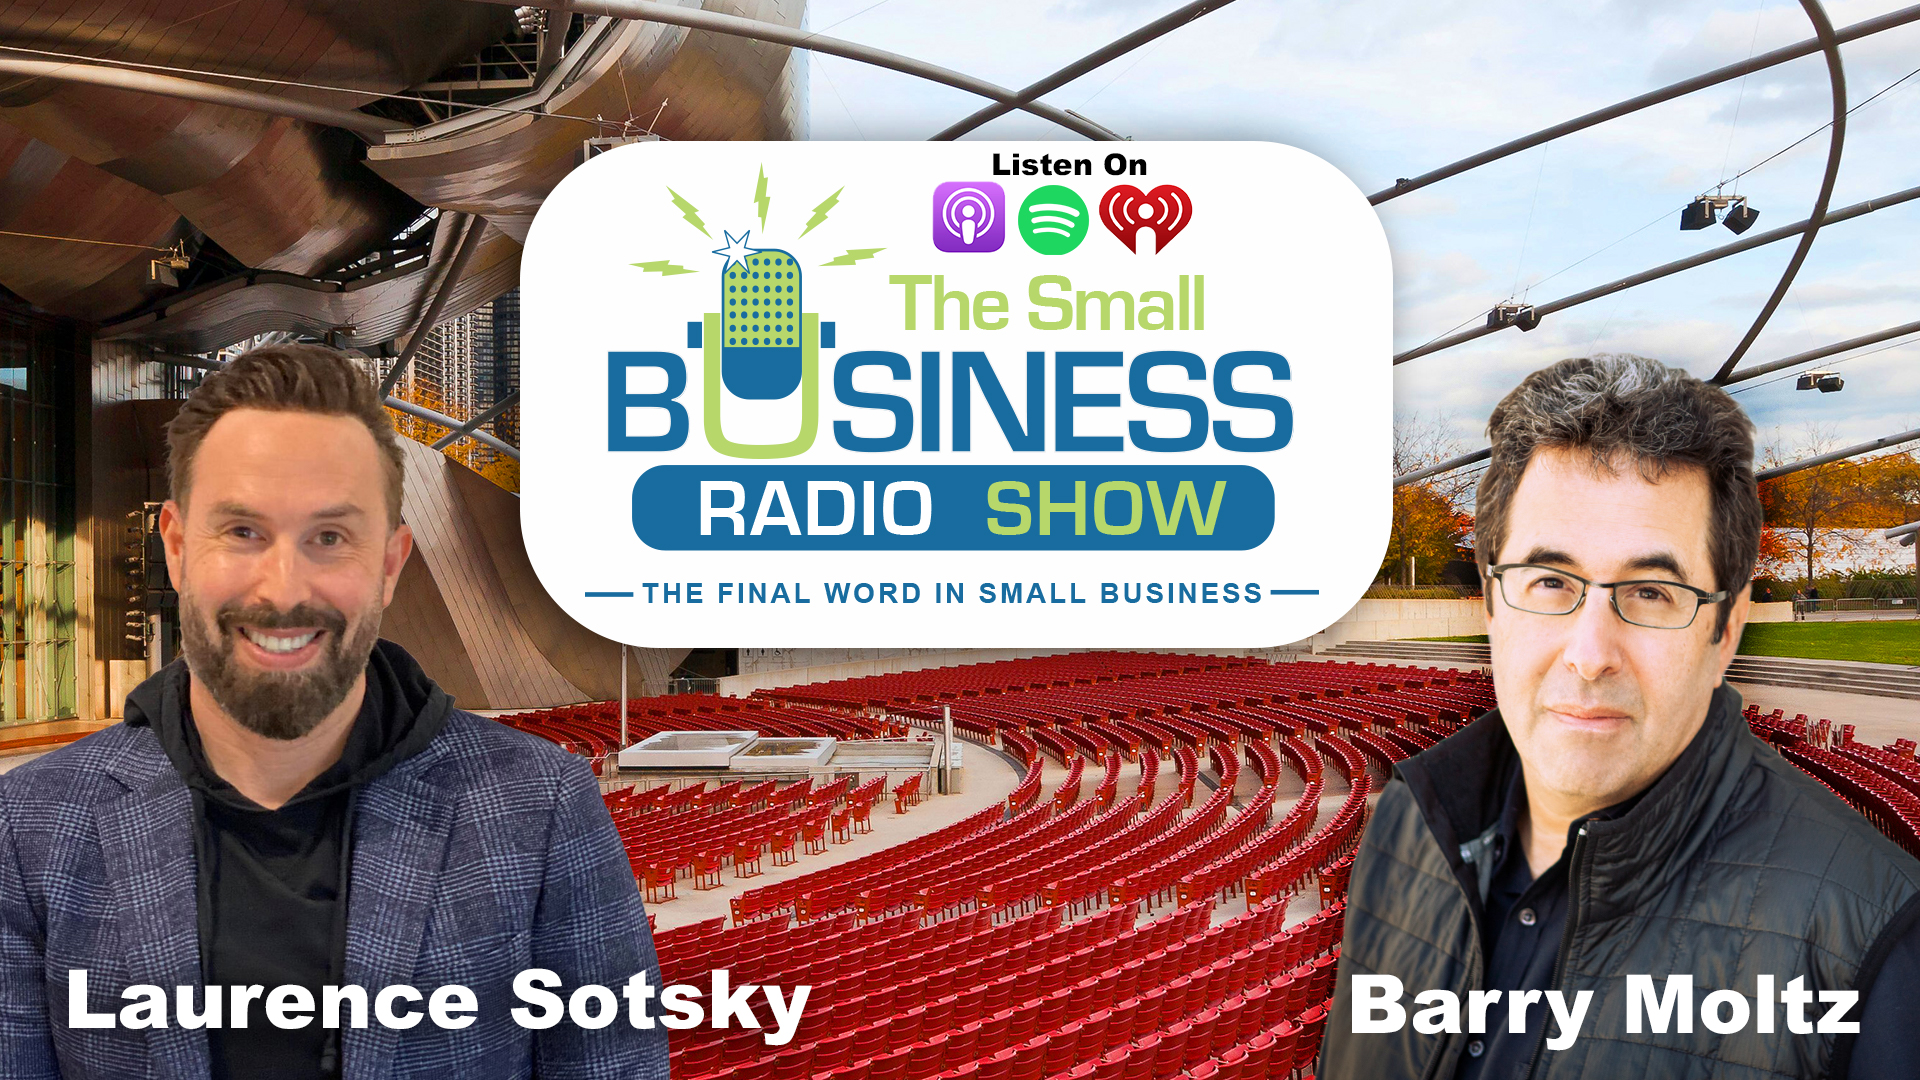 Laurence Sotsky on The Small Business Radio Show